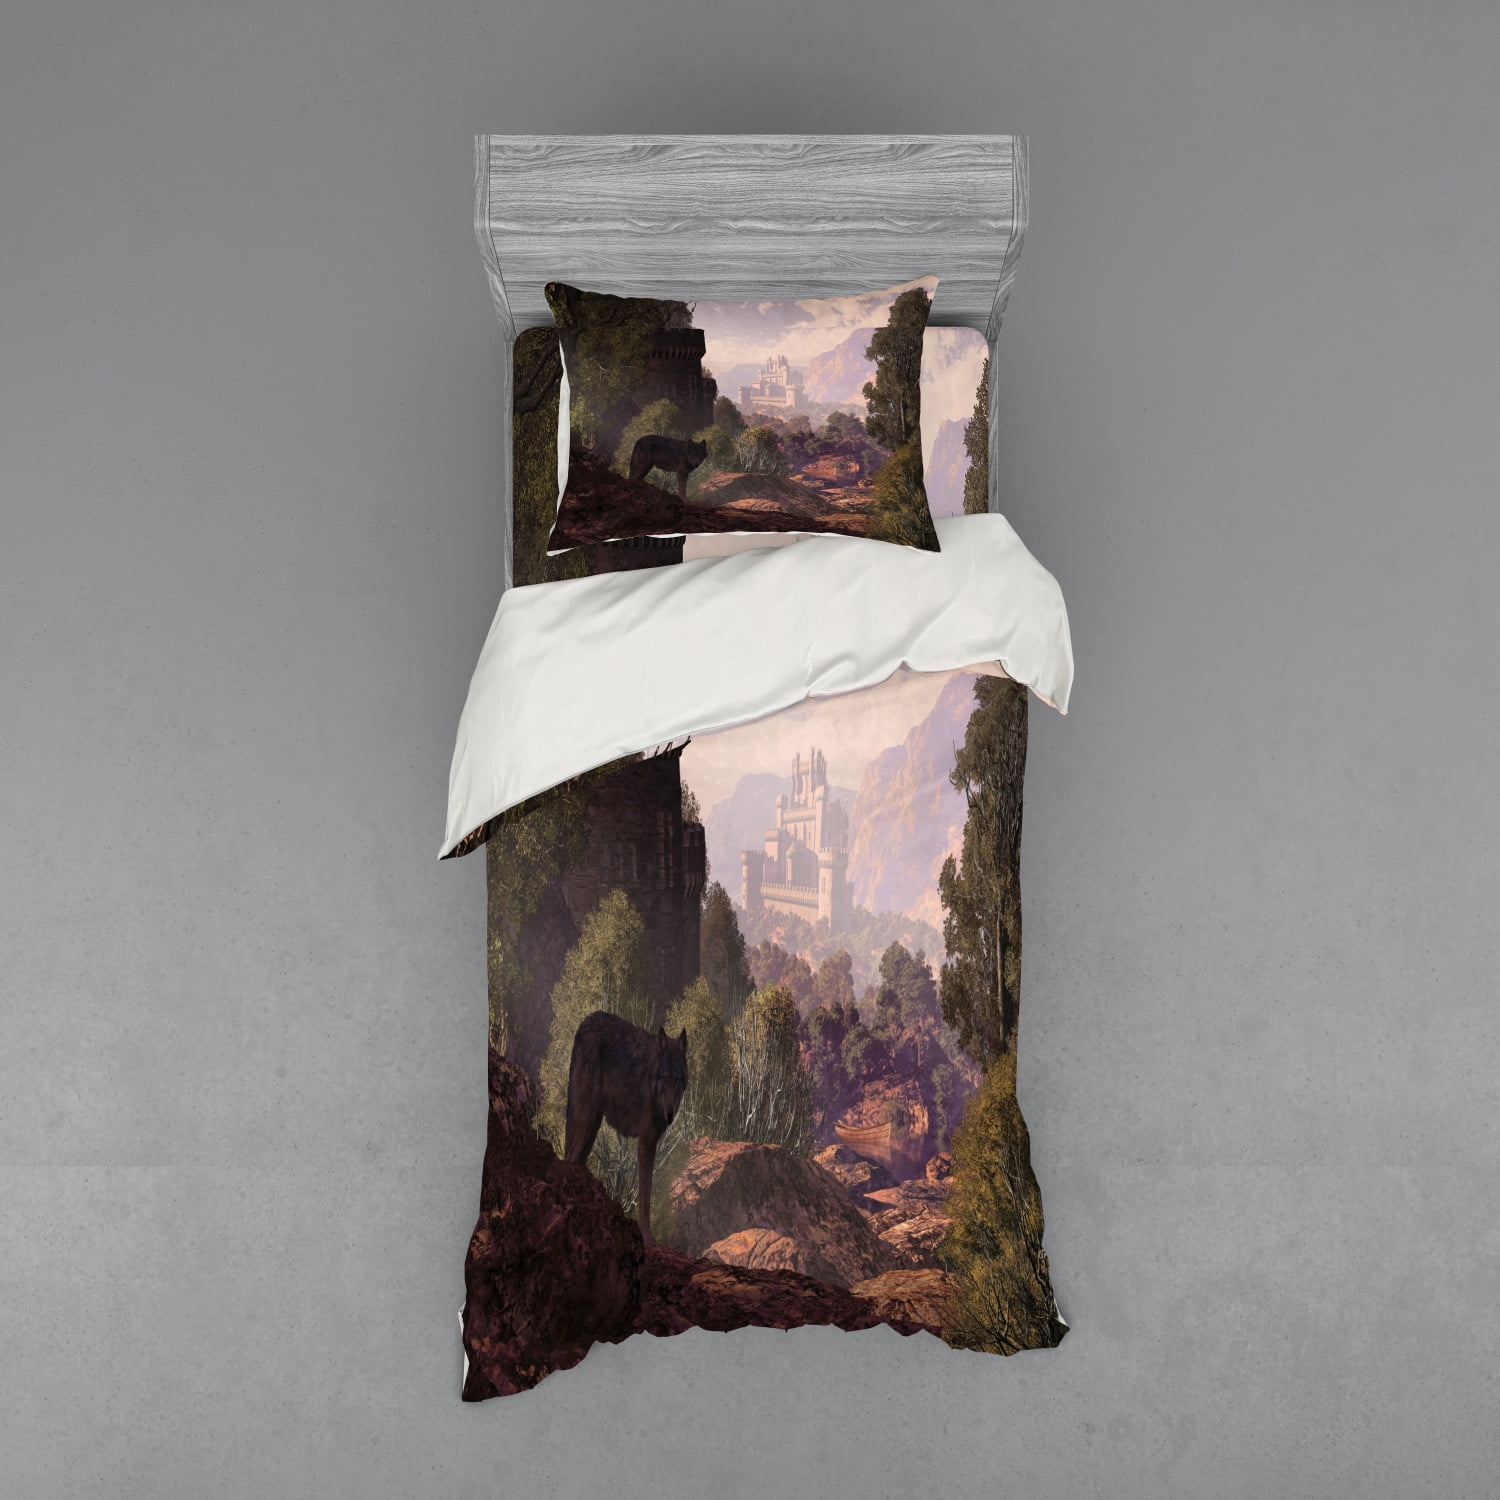 Ambesonne Woodland Duvet Cover Set Twin Size Decorative 2 Piece Bedding Set with 1 Pillow Sham Wolf Coming Out of The Woods Gothic Castle Lake Boat Off in Distance Green Brown 